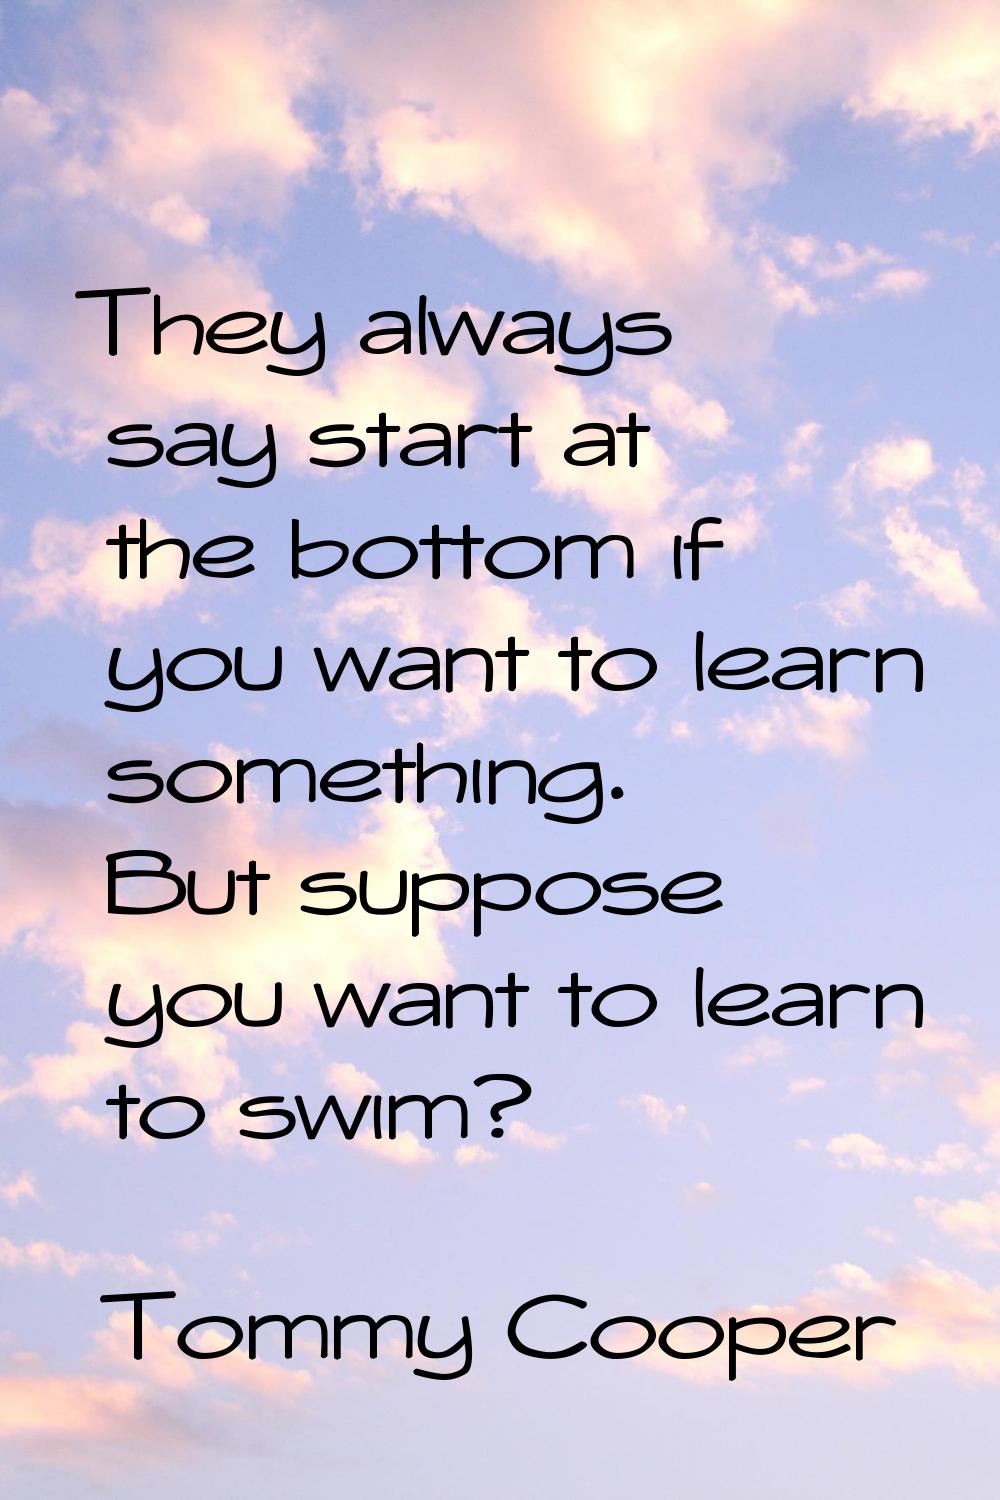 They always say start at the bottom if you want to learn something. But suppose you want to learn t